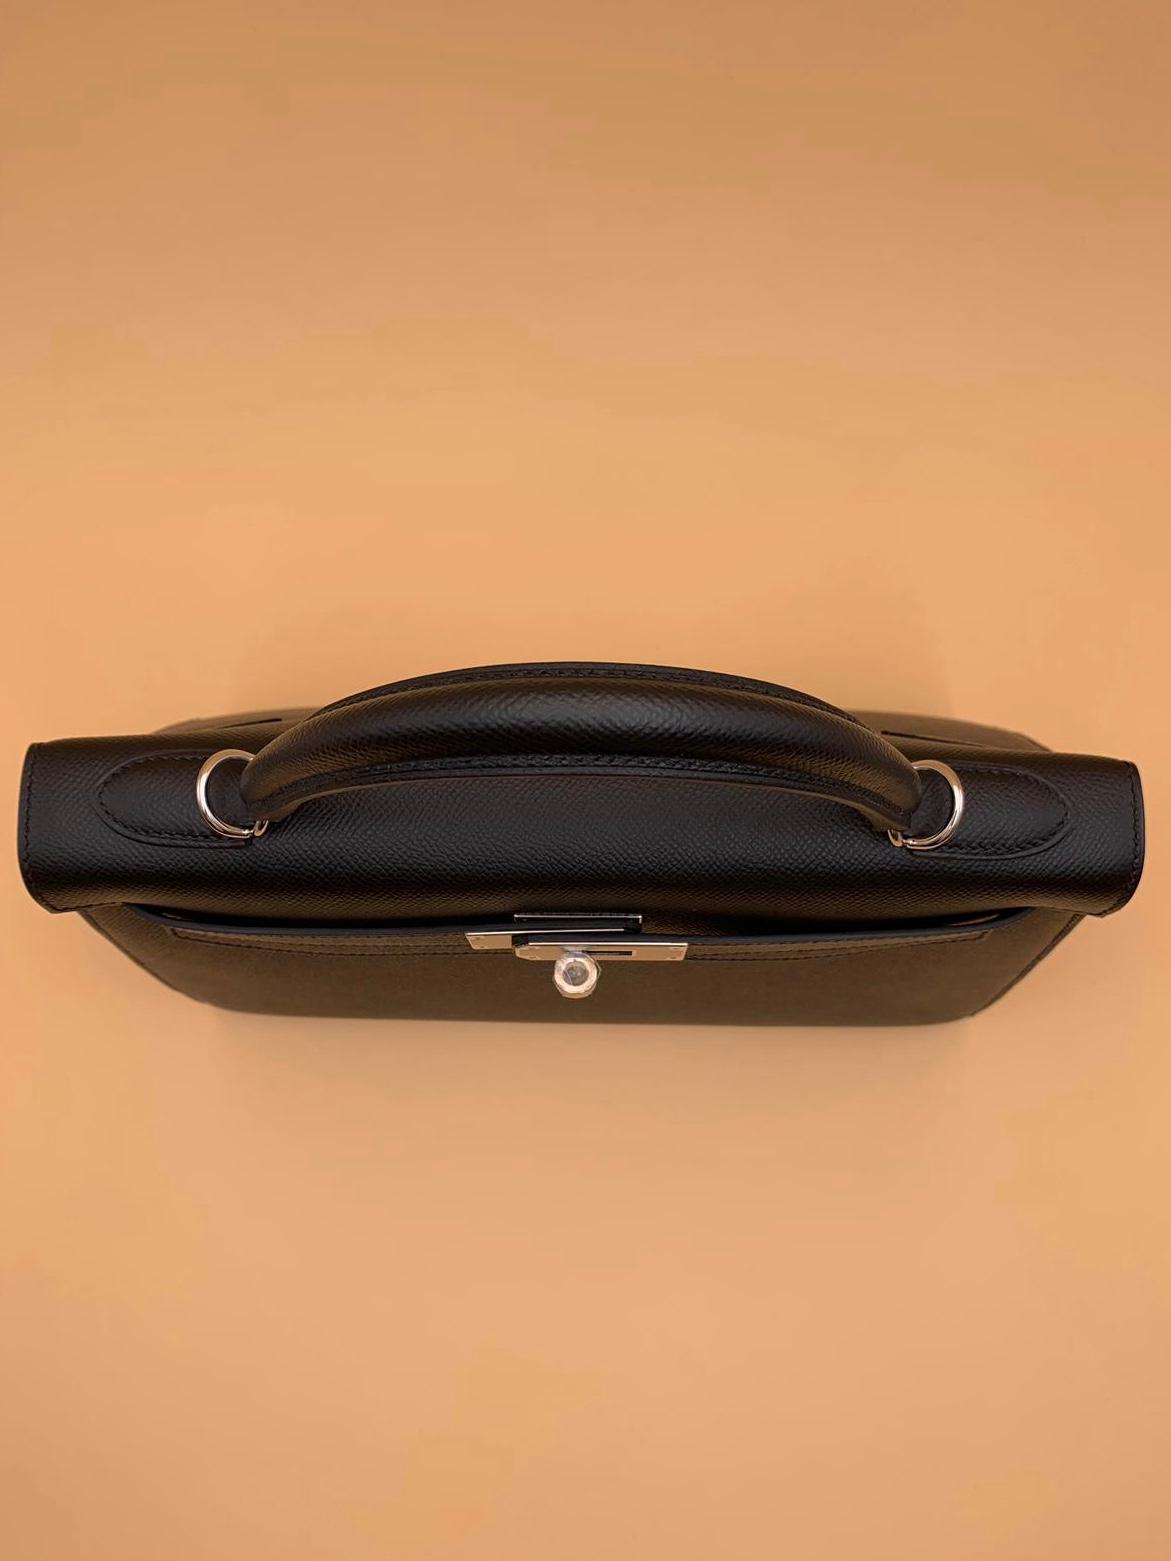 A BLACK EPSOM LEATHER SELLIER KELLY 32 WITH GOLD HARDWARE, HERMÈS, 2019